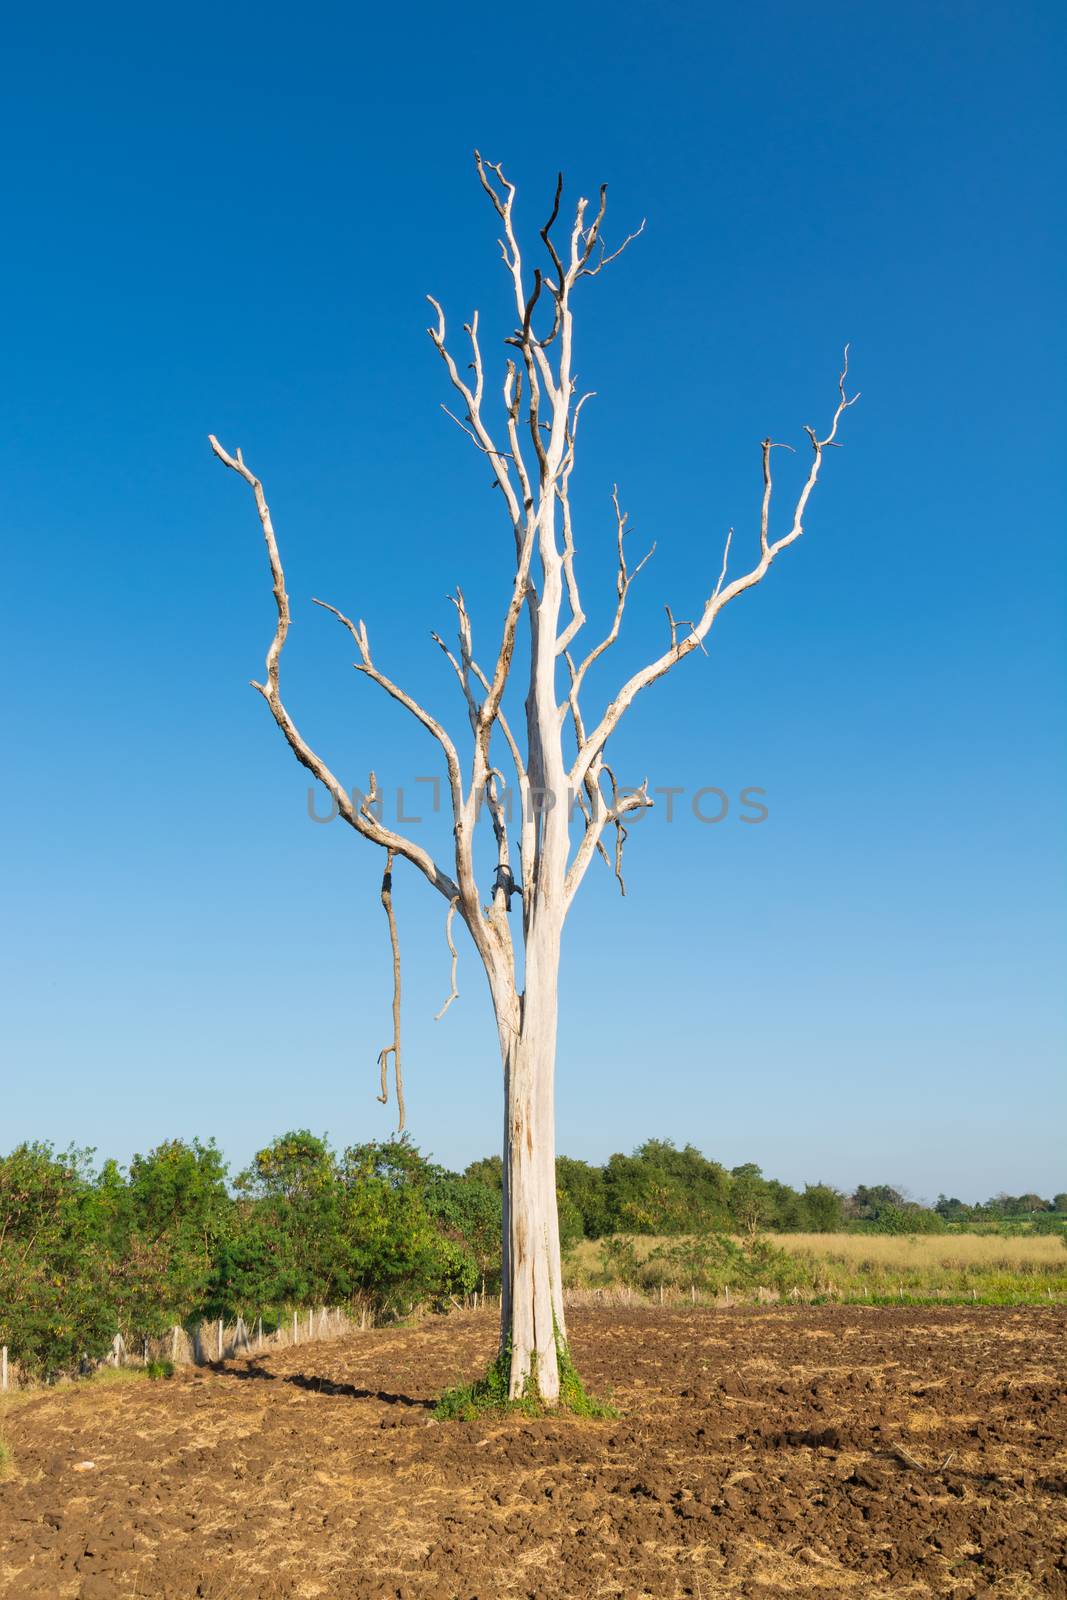 White Trunk Leafless Dead tree in Field of Sunshine Sunny Day with Summer blue Sky Background as Ecology or Environment Conserving Concept